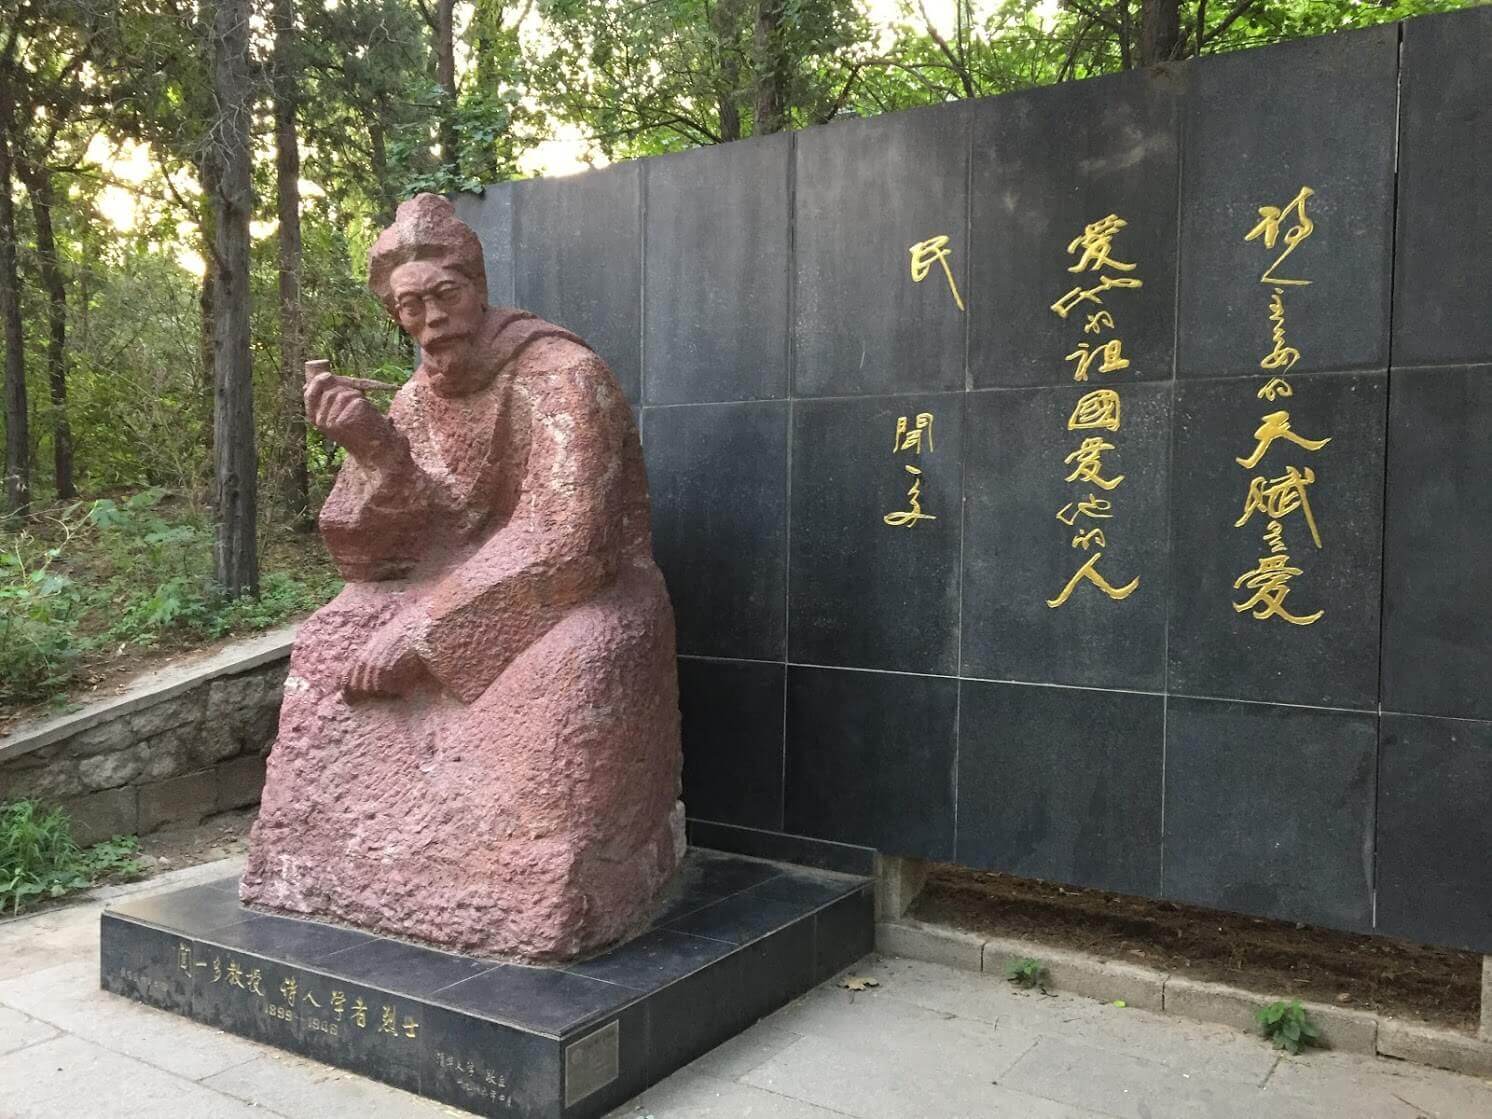 statue of a Chinese man